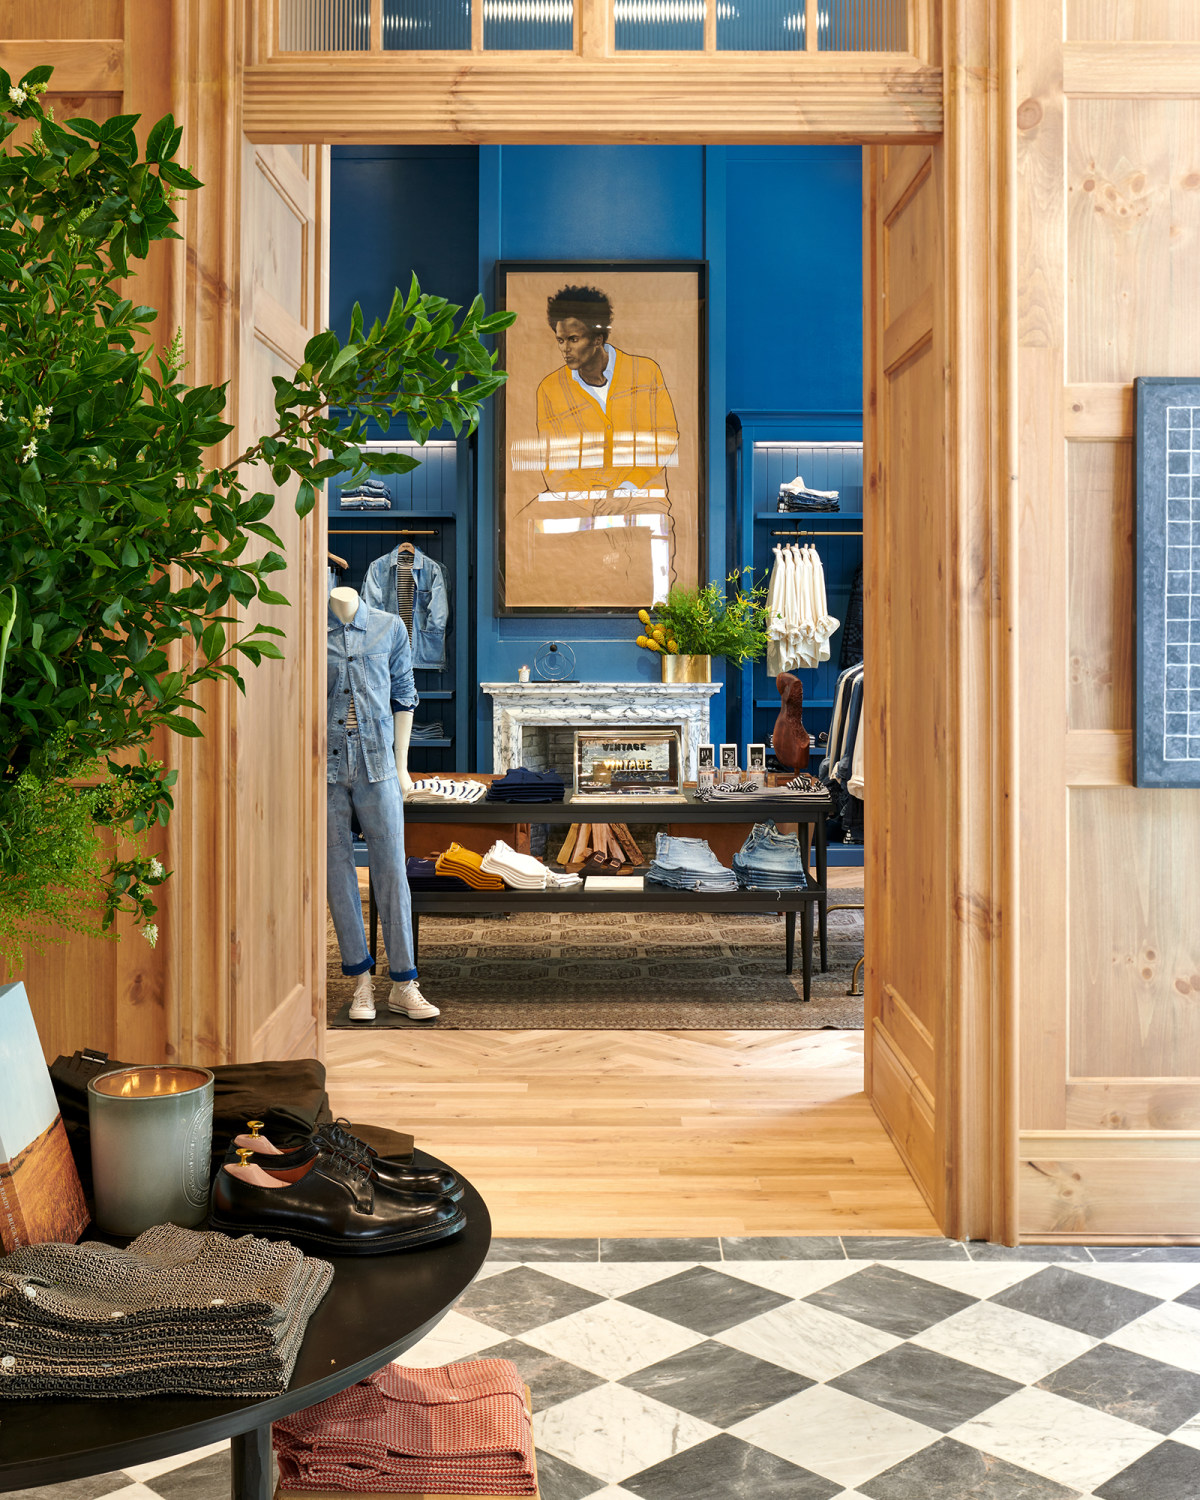 Brick and mortar retail is back, without the gimmicks